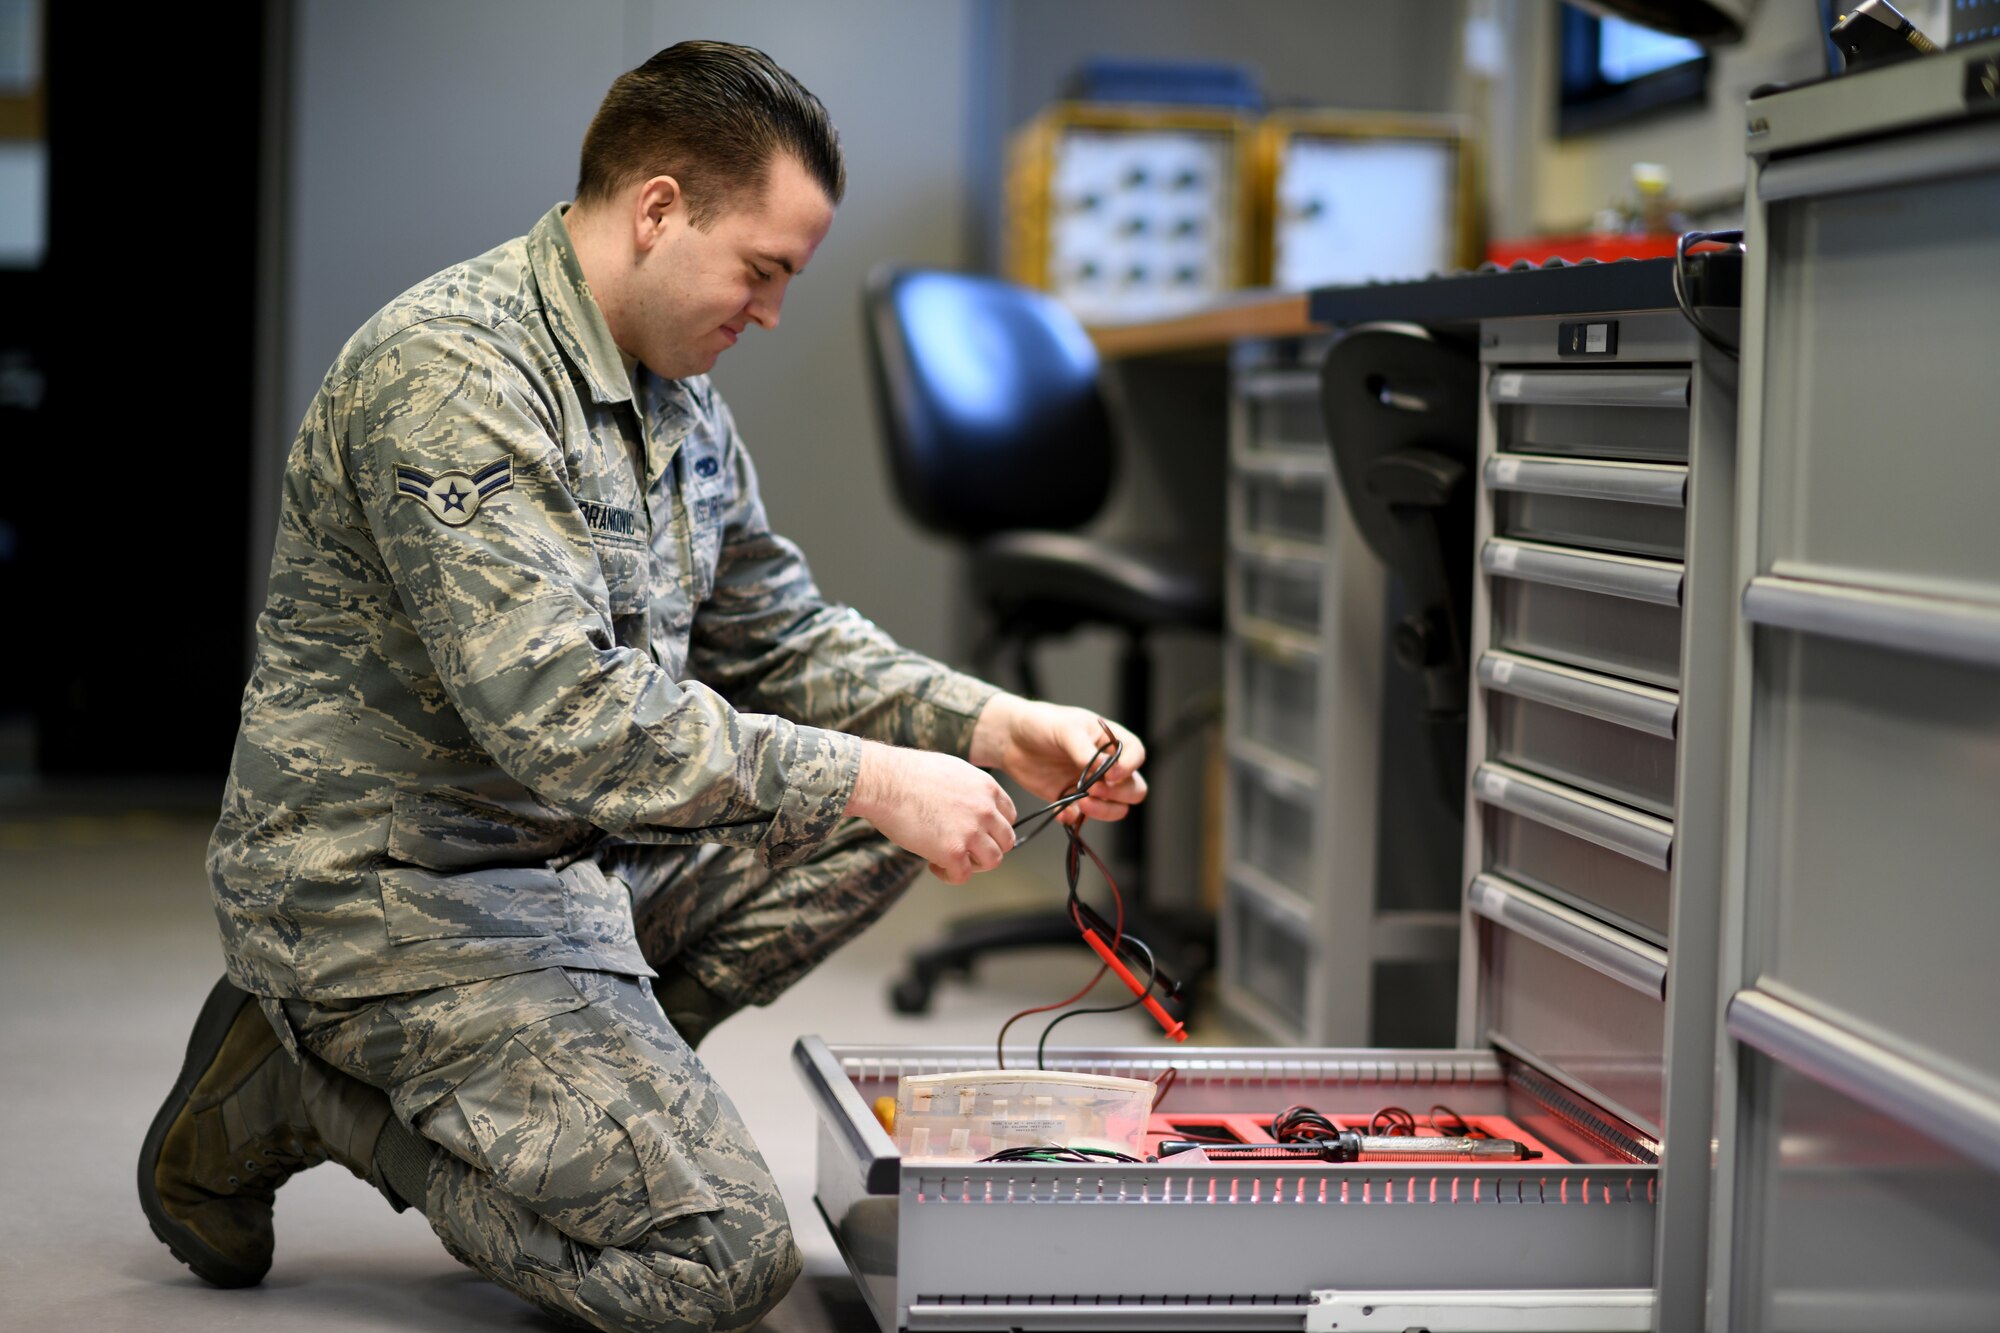 An Airman assigned to the 48th Component Maintenance Squadron’s Electrical and Environmental section retrieves test leads for an operations check on equipment at Royal Air Force Lakenheath, England, Jan. 23, 2019. The test leads are used to send a surge of energy into a component testing its capabilities before it is returned to service. (U.S. Air Force photo by Senior Airman Malcolm Mayfield)